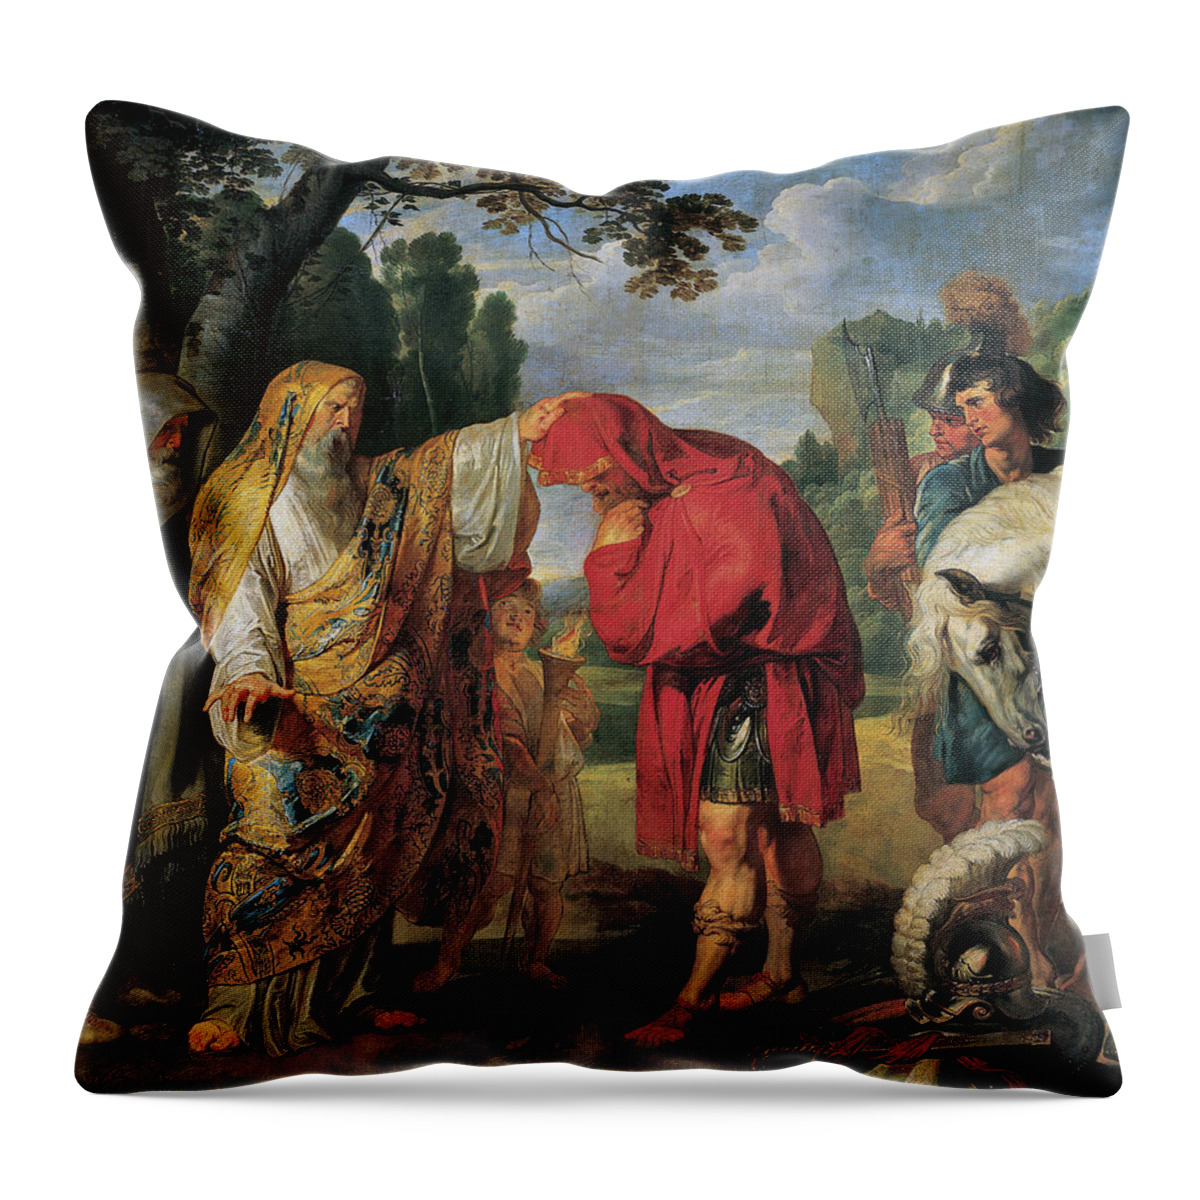 Peter Paul Rubens Throw Pillow featuring the painting Consecration of Decius Mus by Peter Paul Rubens